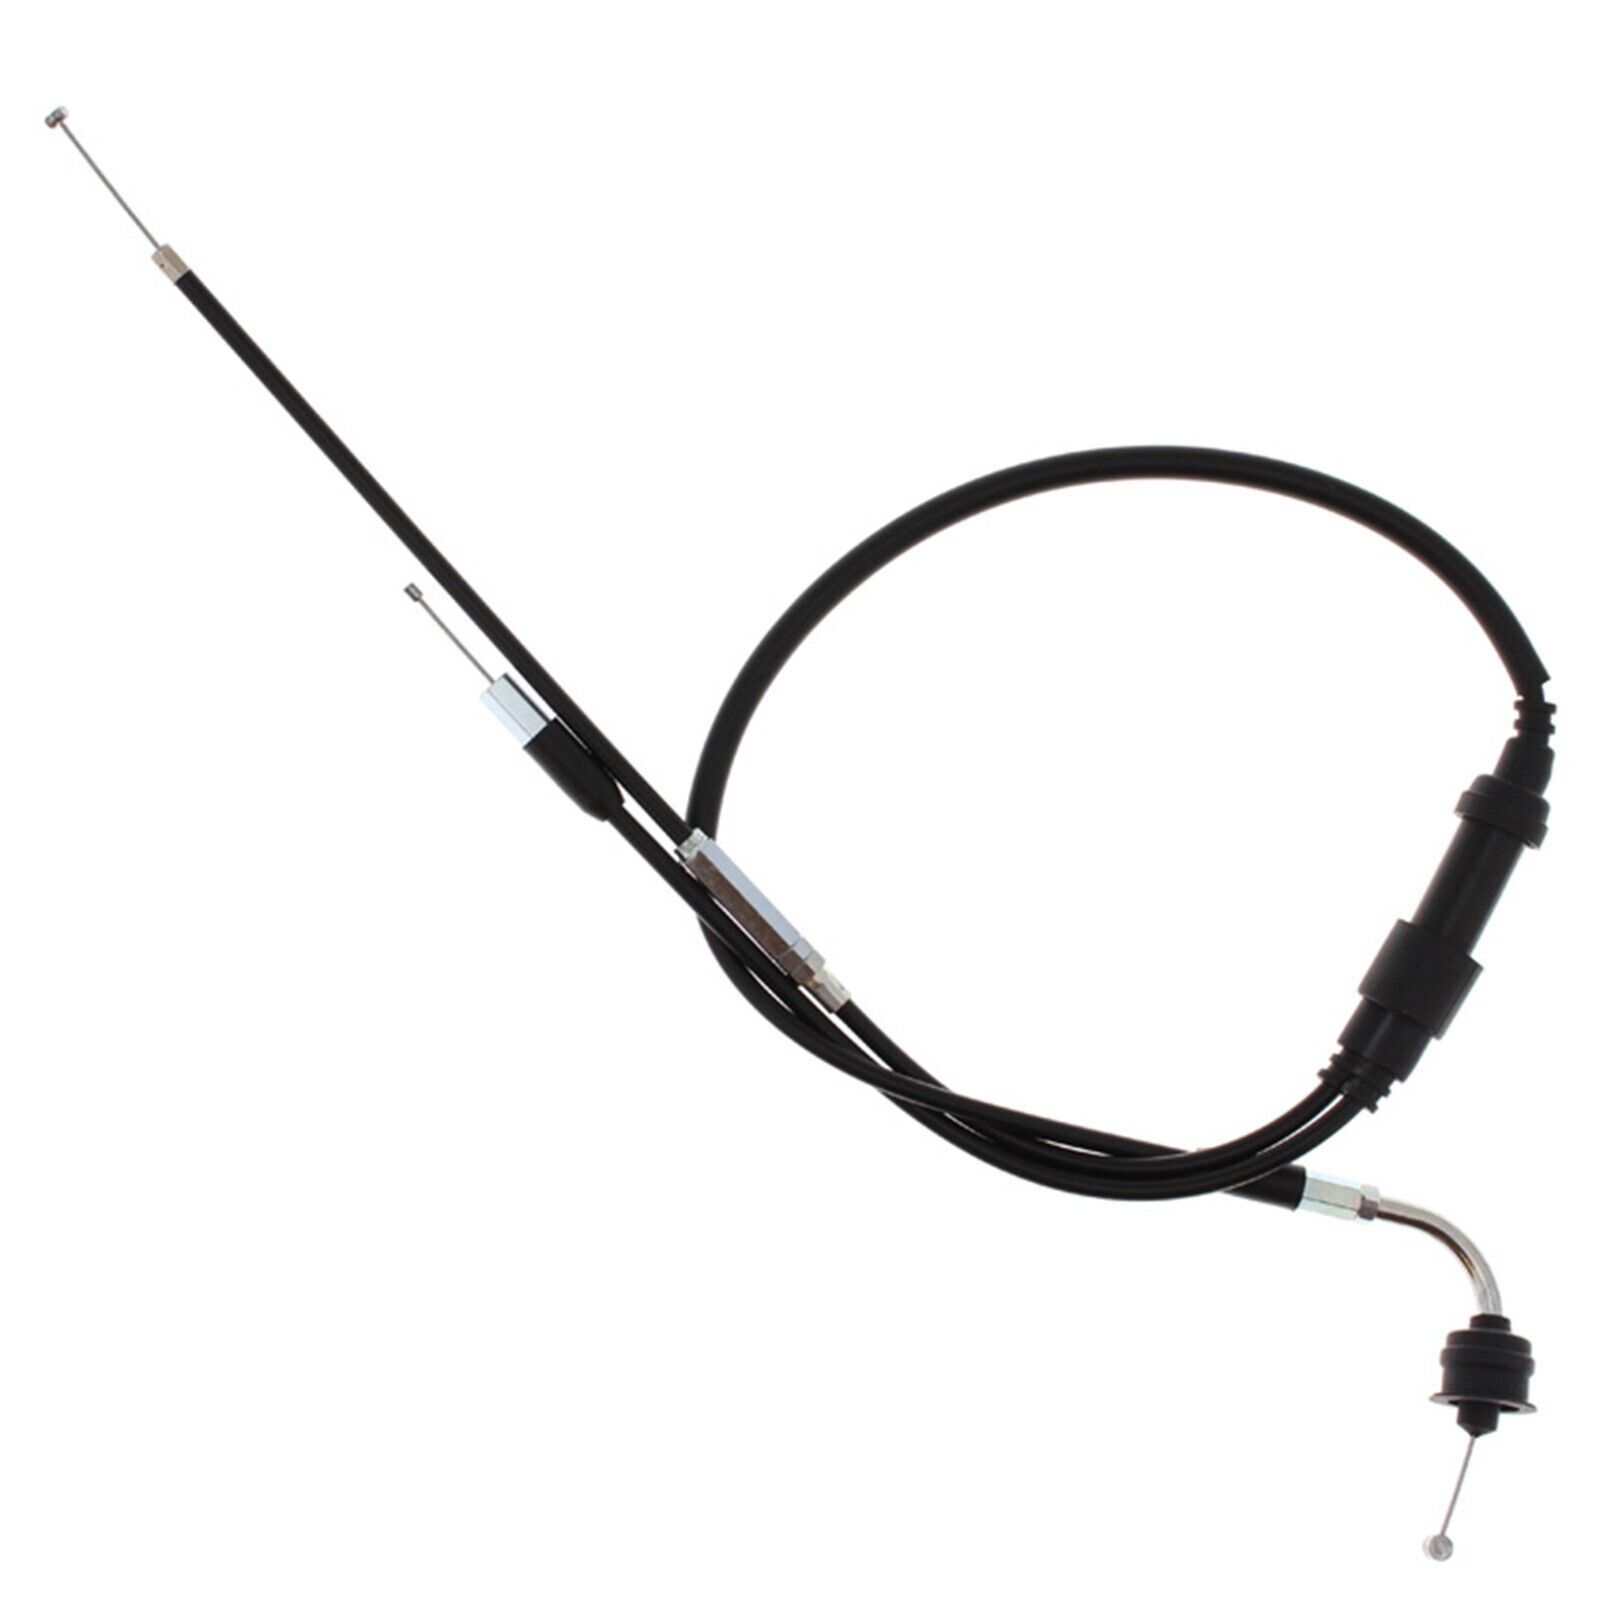 New All Balls Racing Throttle Cable For The 2003-2020 Yamaha PW50 PW 50 - $14.95